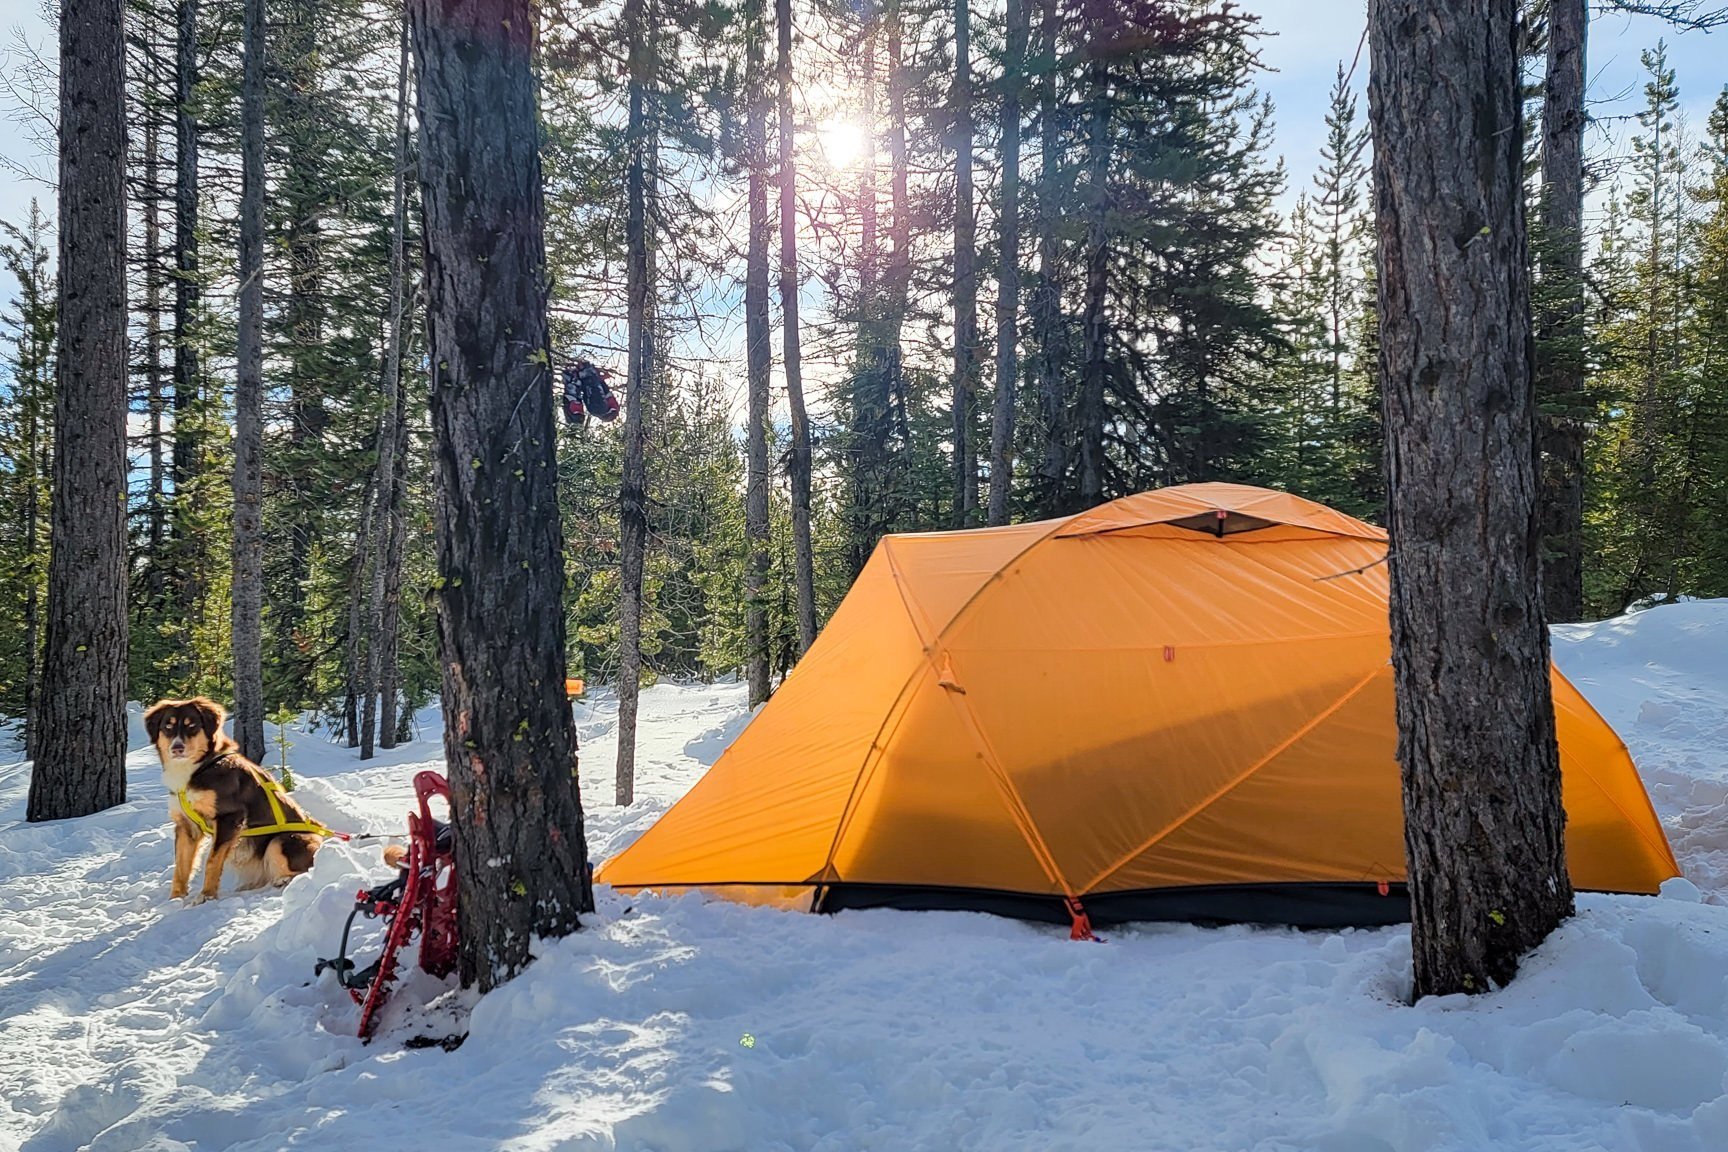 The NEMO Kunai 4 Season Tent set up in snow in a forest